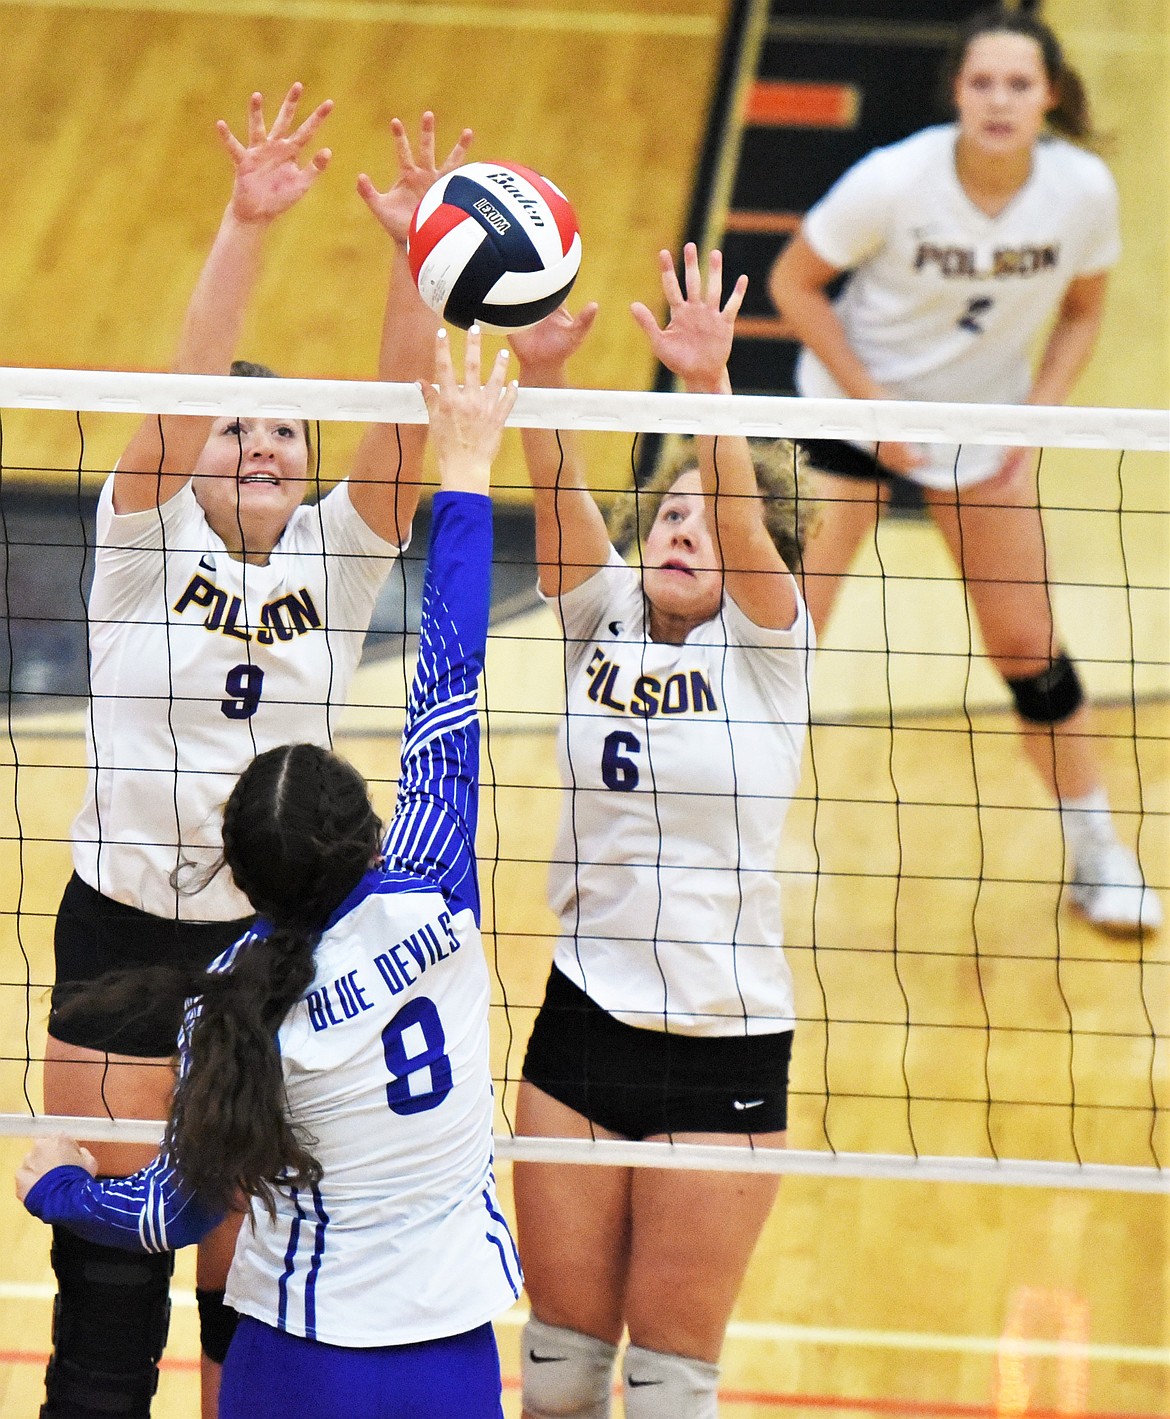 Clara Todd (9) and Camilla Foresti (6) rise to block a shot by Olivia Lewis of Corvallis. (Scot Heisel/Lake County Leader)